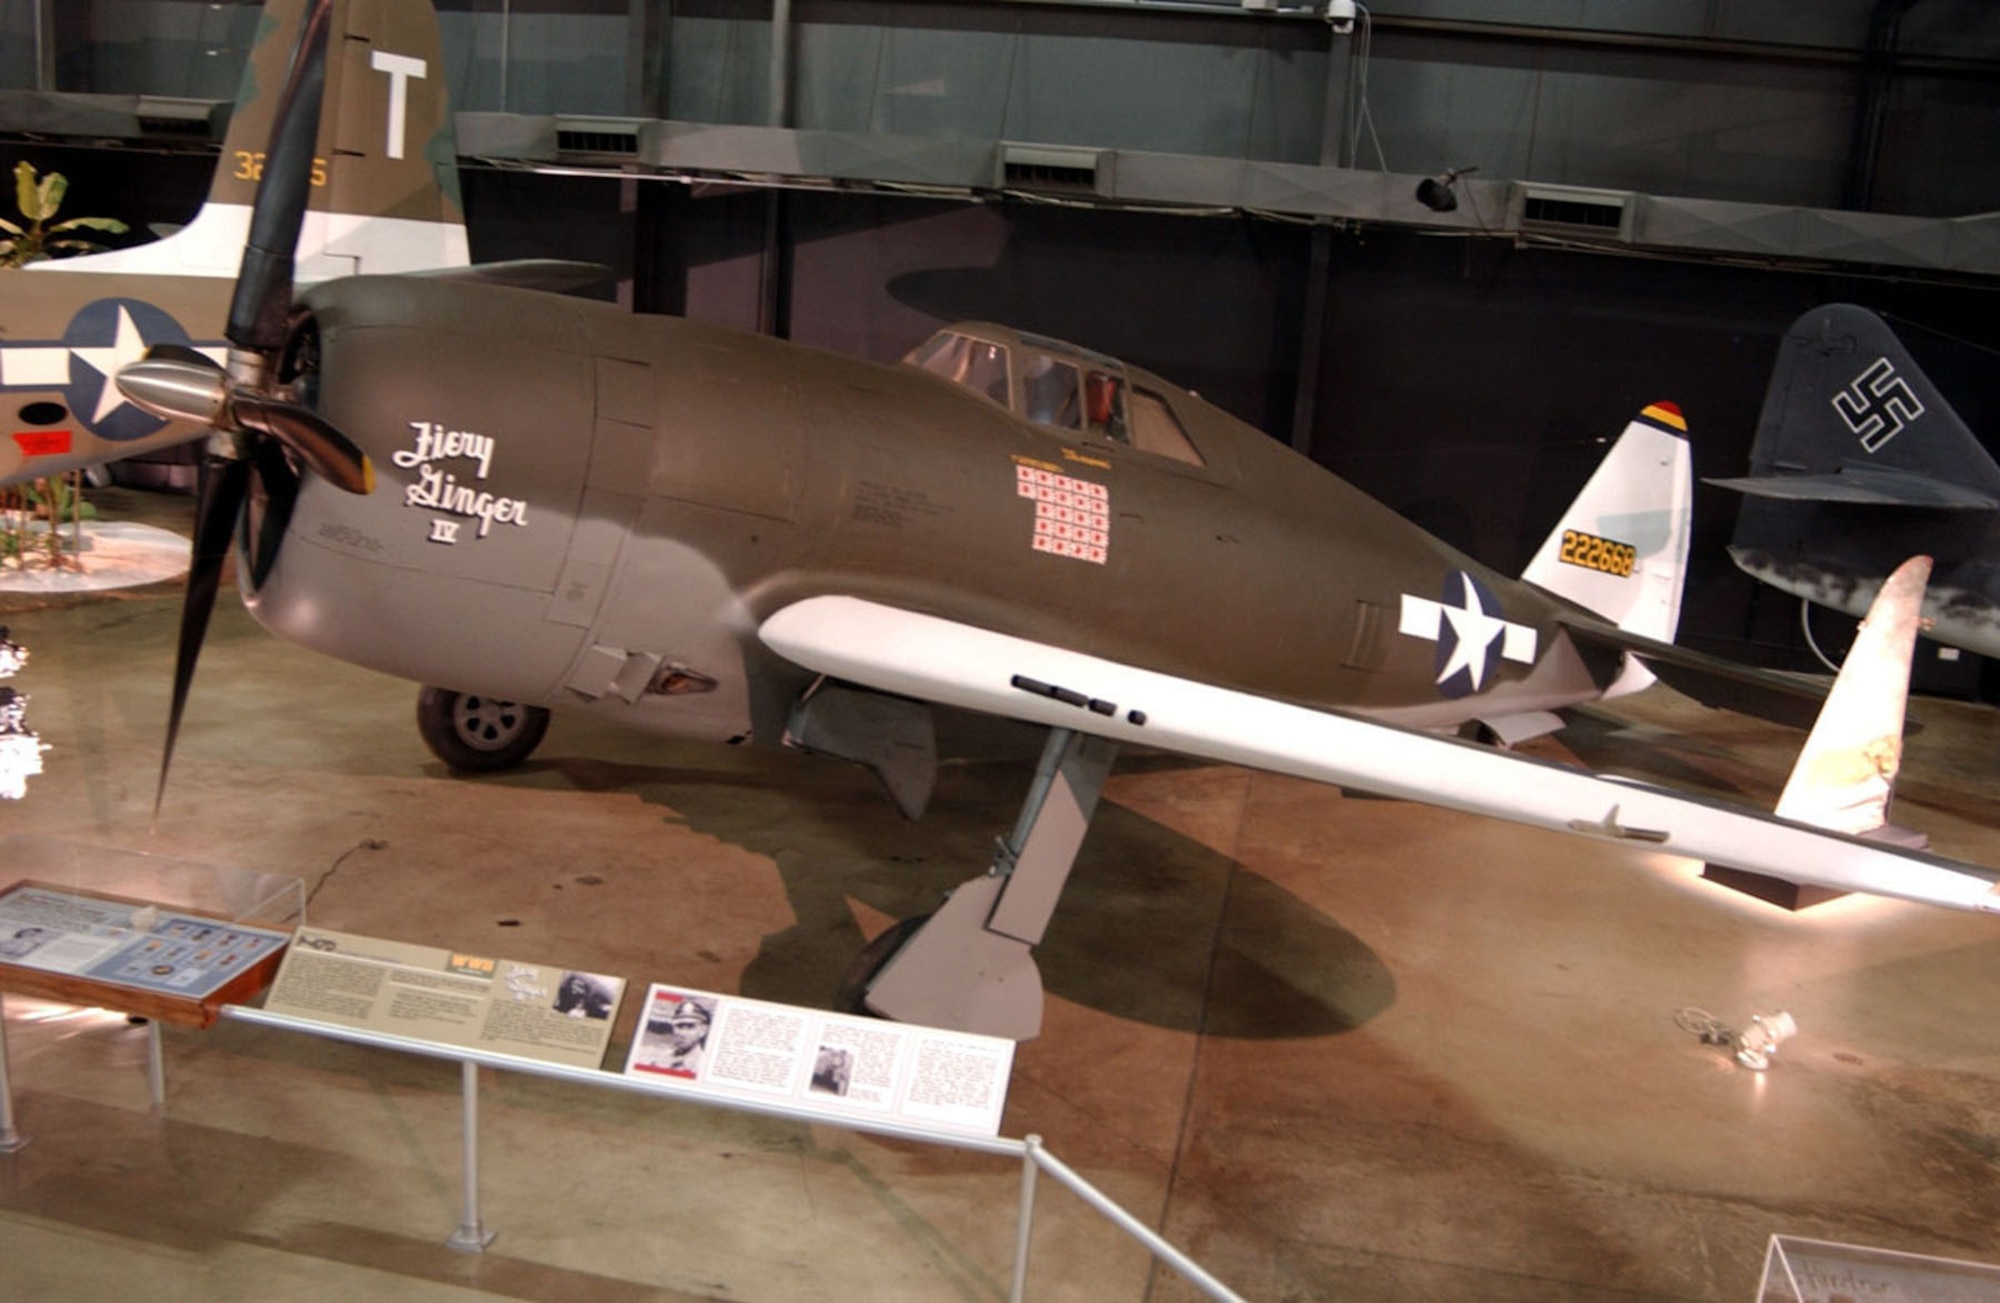 DAYTON, Ohio -- Republic P-47D "Fiery Ginger" in the World War II Gallery at the National Museum of the United States Air Force. (U.S. Air Force photo)